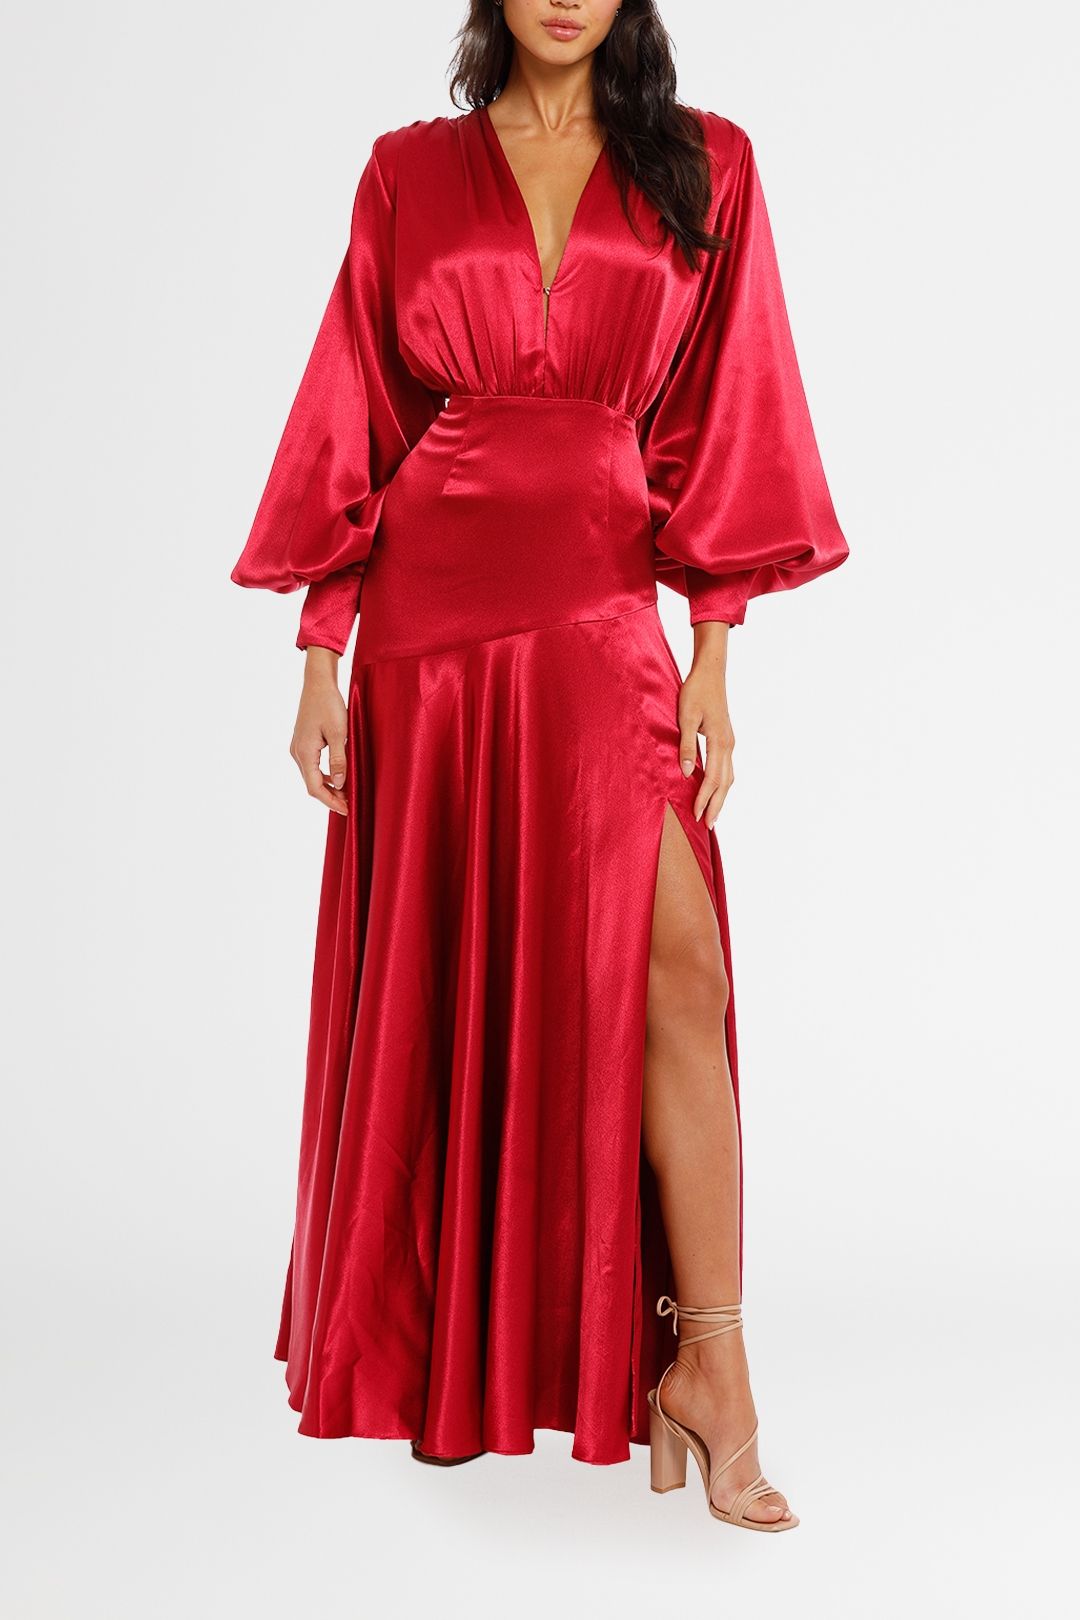 Bronx and Banco Carmen Gown Red